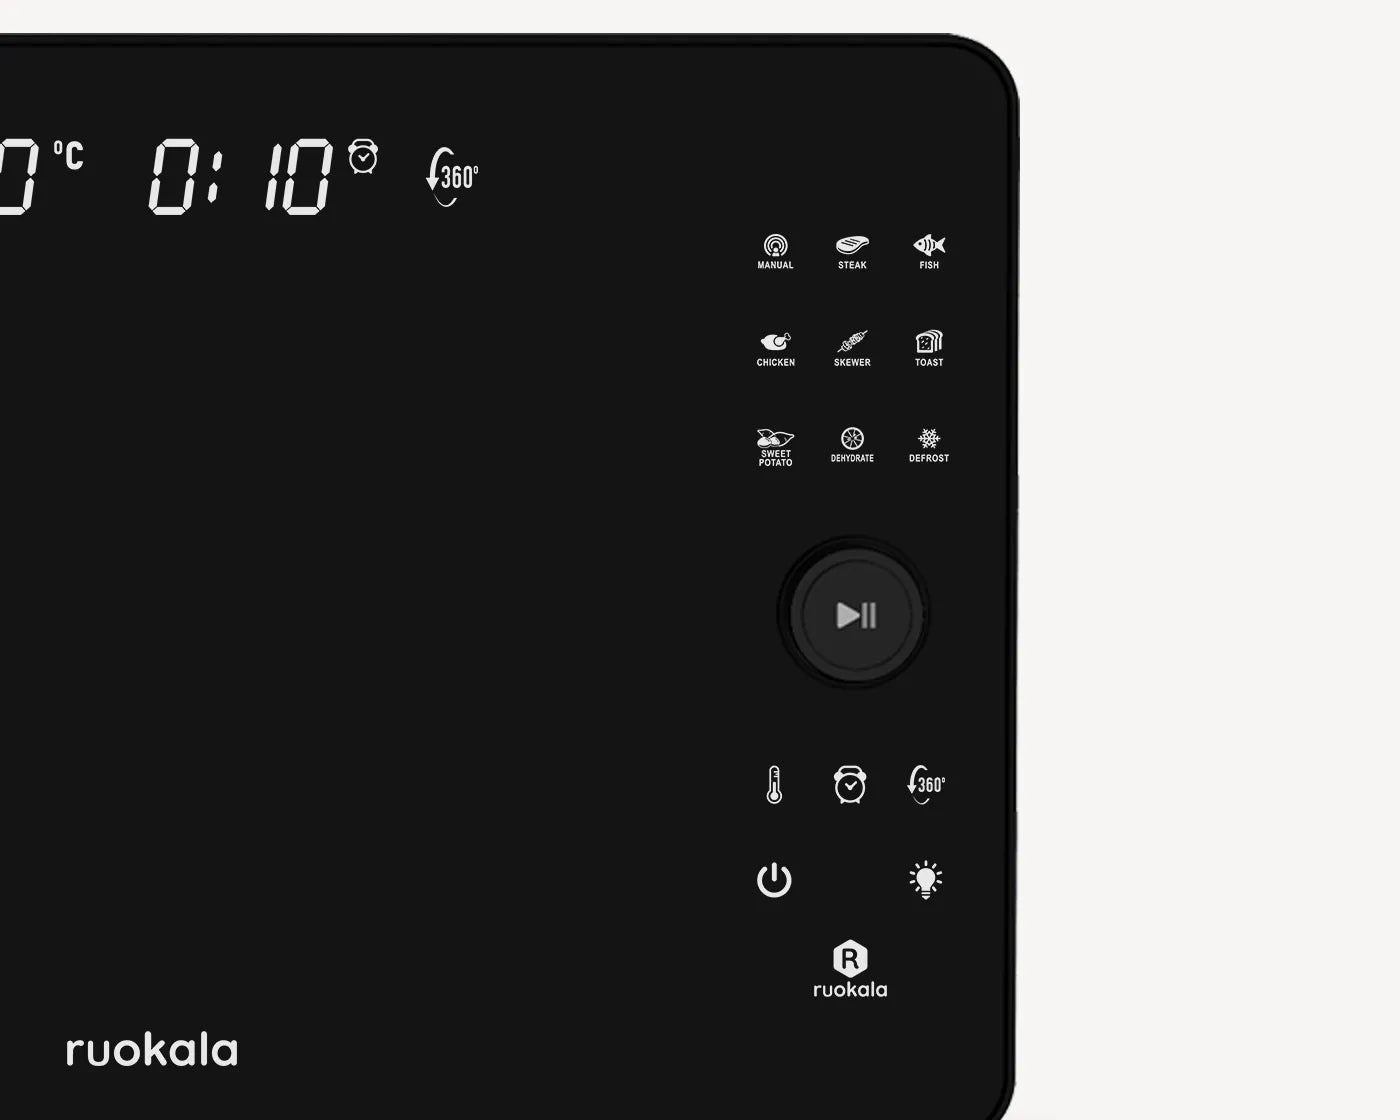 Ruokala air fryer's user-friendly control panel with LED display featuring various cooking presets for ease of use.